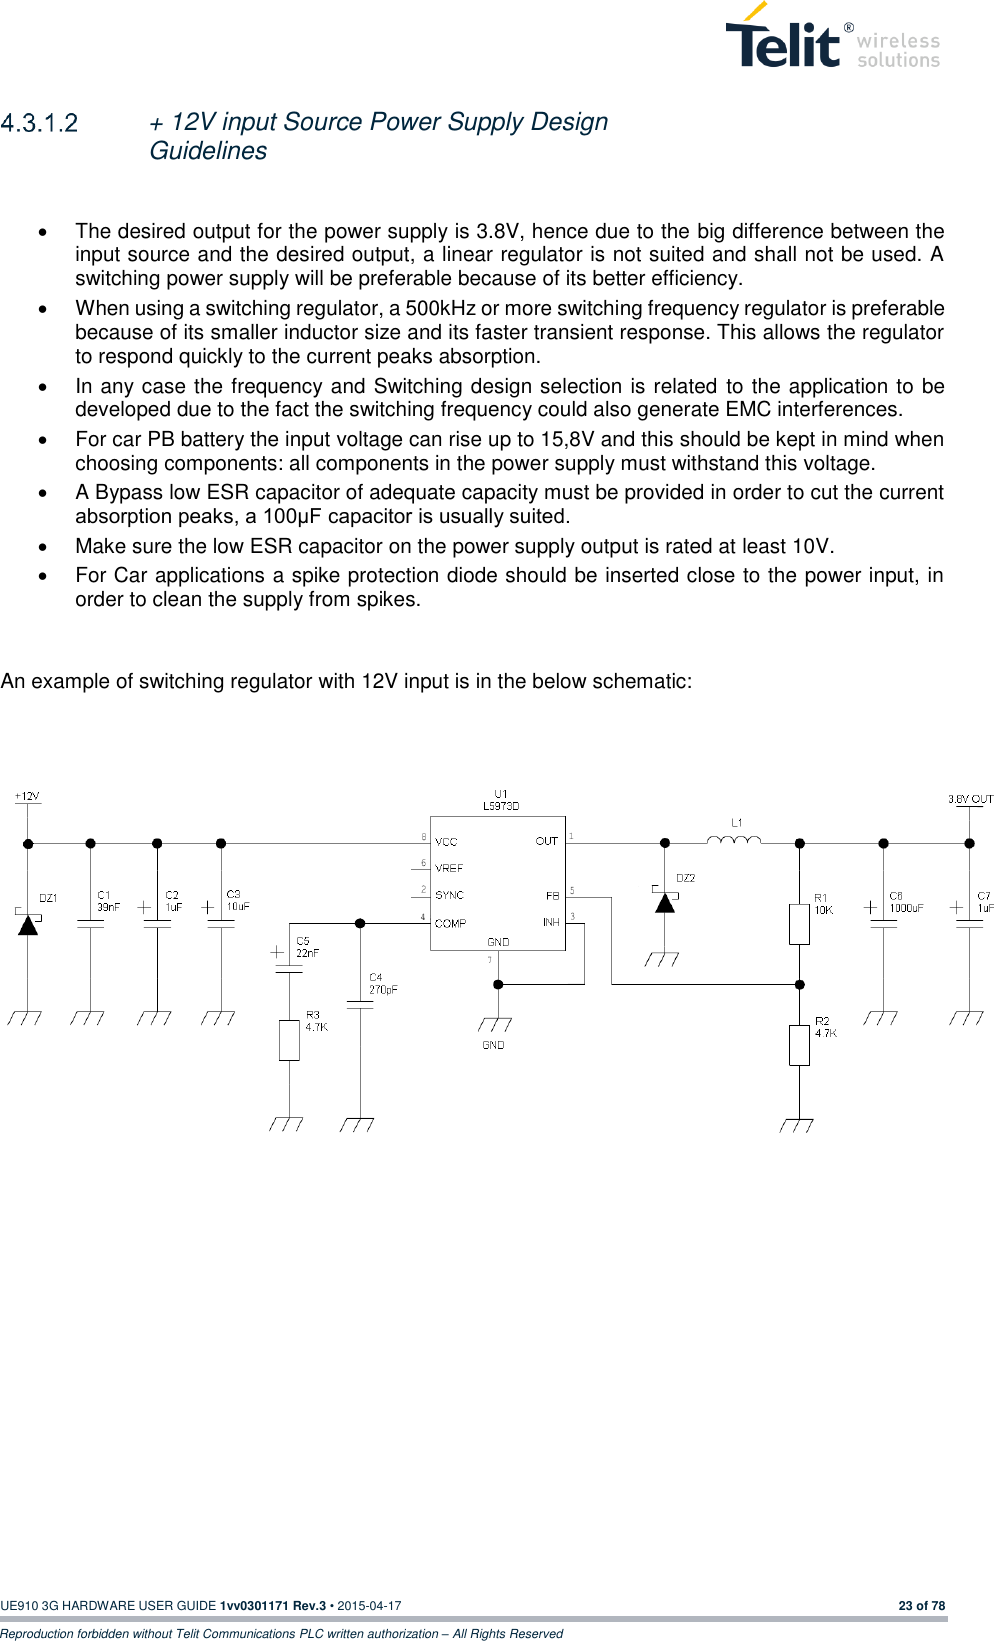  UE910 3G HARDWARE USER GUIDE 1vv0301171 Rev.3 • 2015-04-17 23 of 78 Reproduction forbidden without Telit Communications PLC written authorization – All Rights Reserved   + 12V input Source Power Supply Design Guidelines    The desired output for the power supply is 3.8V, hence due to the big difference between the input source and the desired output, a linear regulator is not suited and shall not be used. A switching power supply will be preferable because of its better efficiency.   When using a switching regulator, a 500kHz or more switching frequency regulator is preferable because of its smaller inductor size and its faster transient response. This allows the regulator to respond quickly to the current peaks absorption.    In any case the frequency and Switching design selection is related  to the application to be developed due to the fact the switching frequency could also generate EMC interferences.   For car PB battery the input voltage can rise up to 15,8V and this should be kept in mind when choosing components: all components in the power supply must withstand this voltage.   A Bypass low ESR capacitor of adequate capacity must be provided in order to cut the current absorption peaks, a 100μF capacitor is usually suited.   Make sure the low ESR capacitor on the power supply output is rated at least 10V.   For Car applications a spike protection diode should be inserted close to the power input, in order to clean the supply from spikes.    An example of switching regulator with 12V input is in the below schematic:        